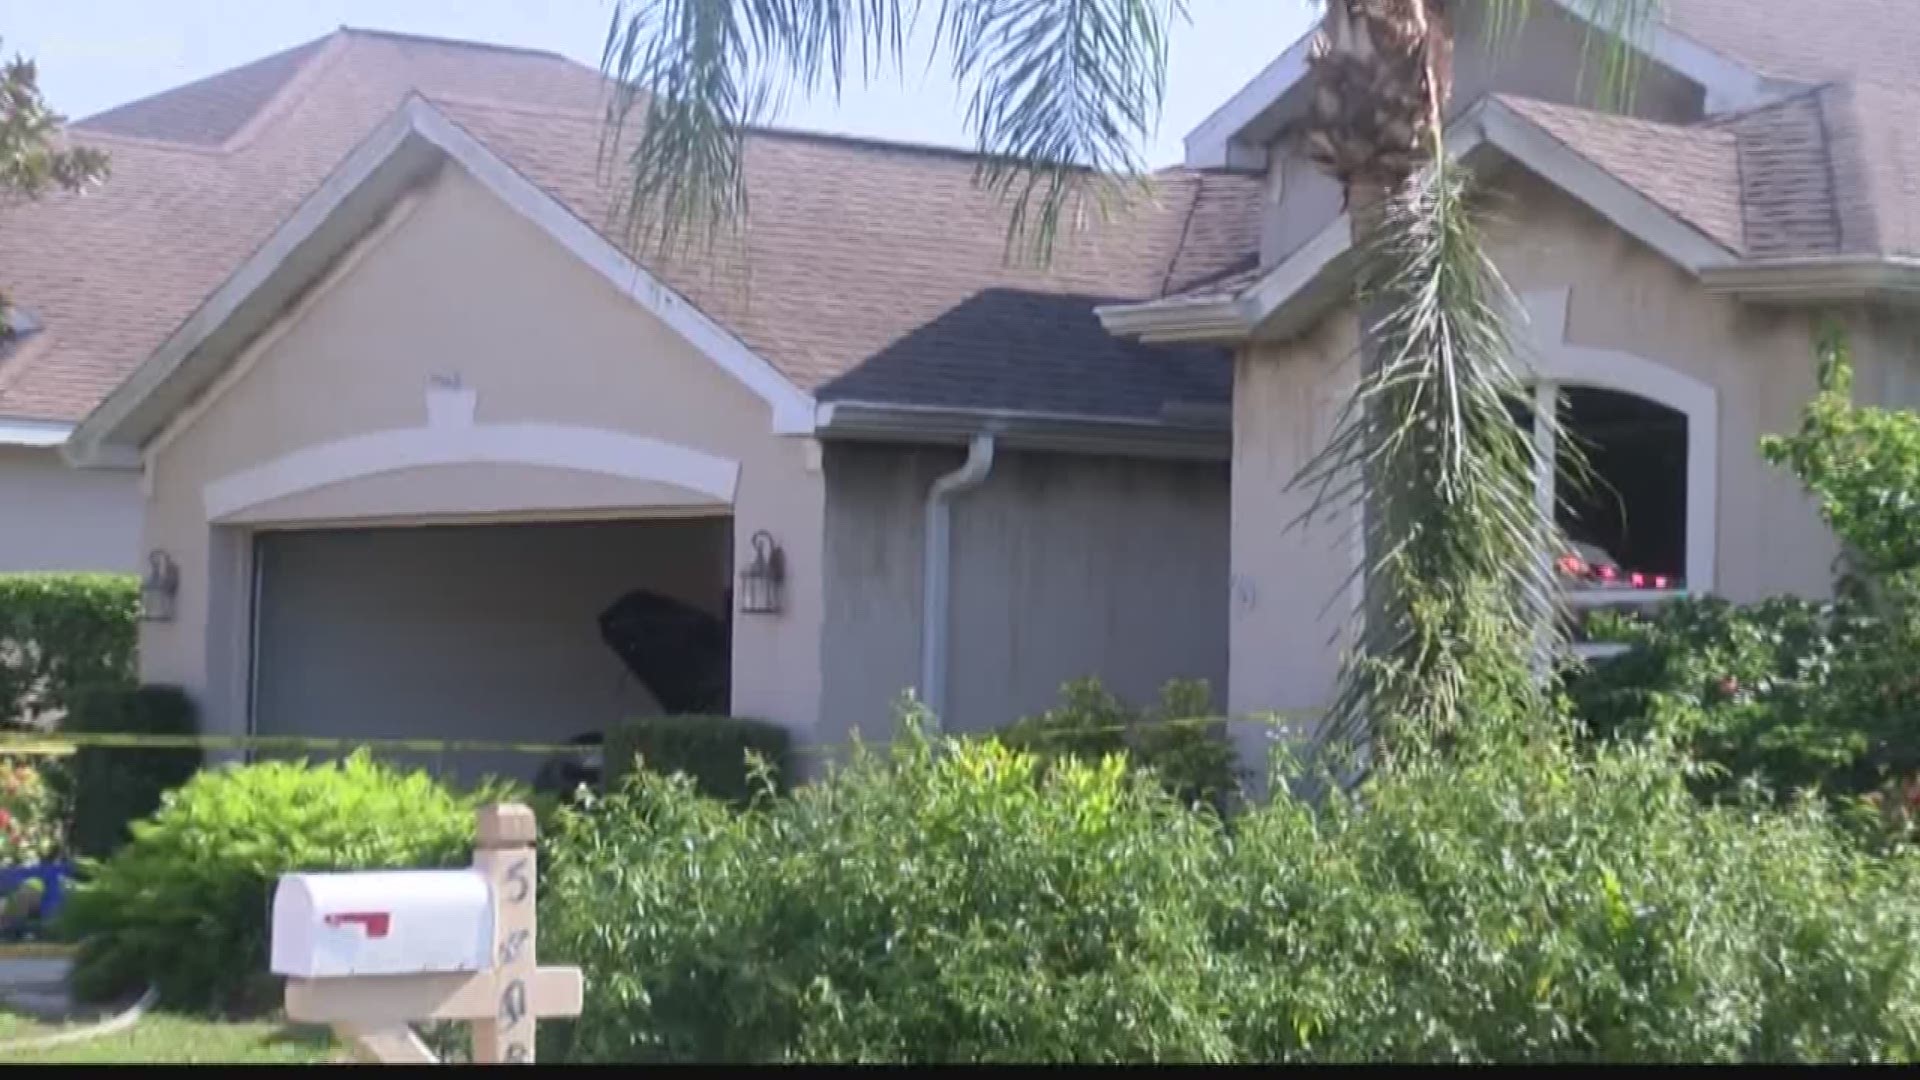 Sarasota firefighters say one person was found dead in a Sarasota house fire Sunday.